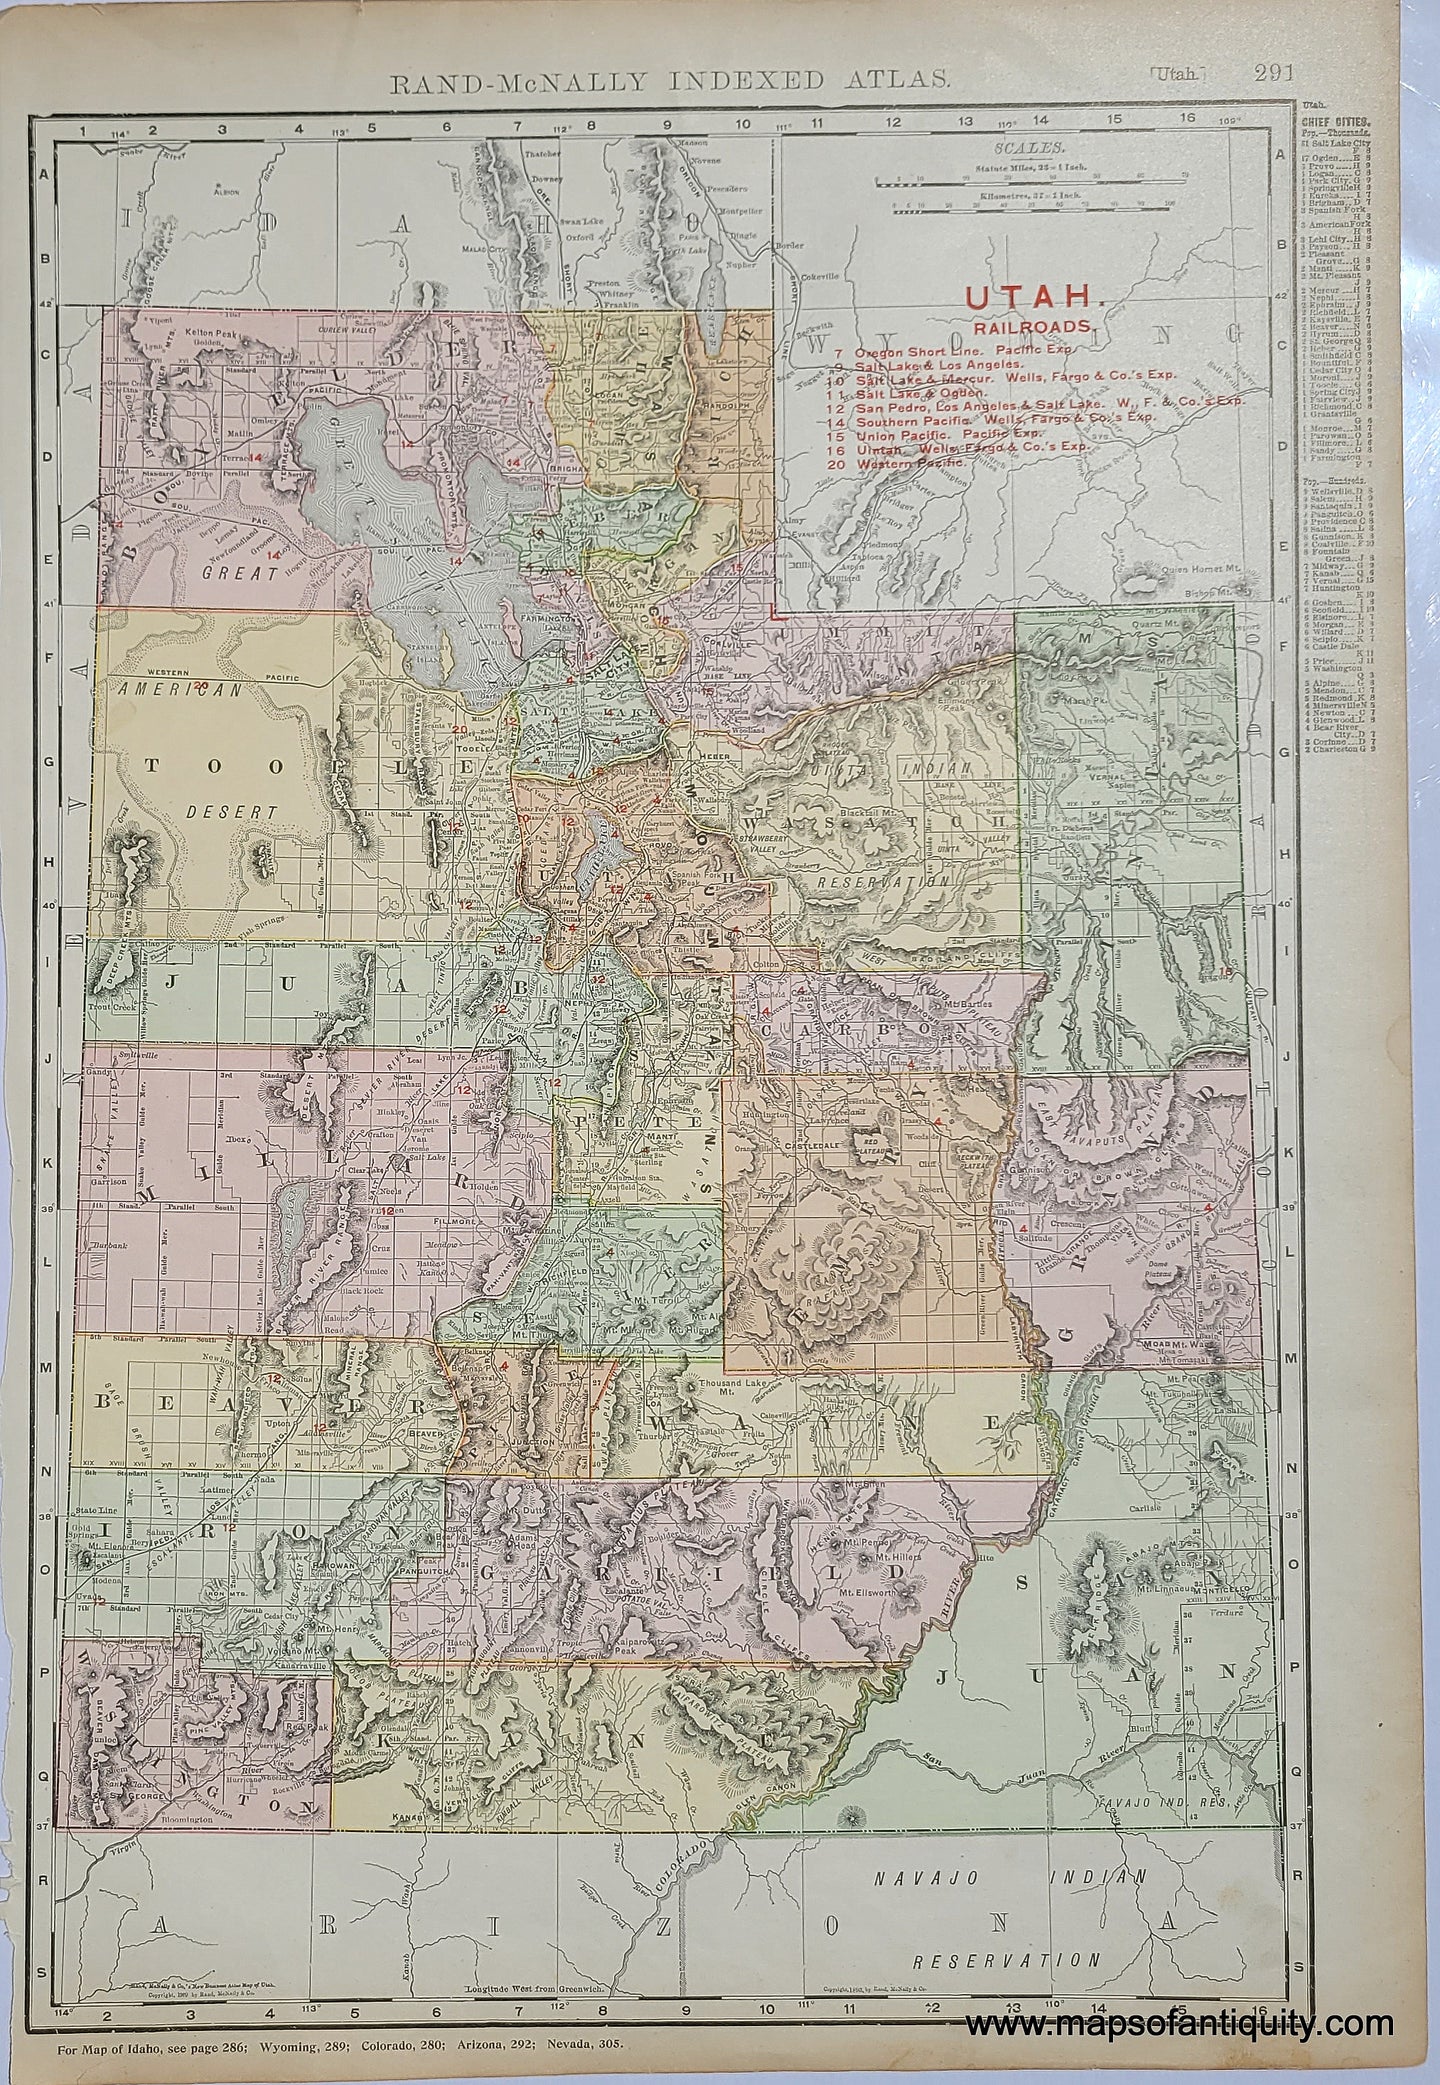 Genuine antique double-sided page with map of Utah on one side and Arizona on the other, printed with vibrant printed color showing early county boundaries, 1909 by Rand McNally